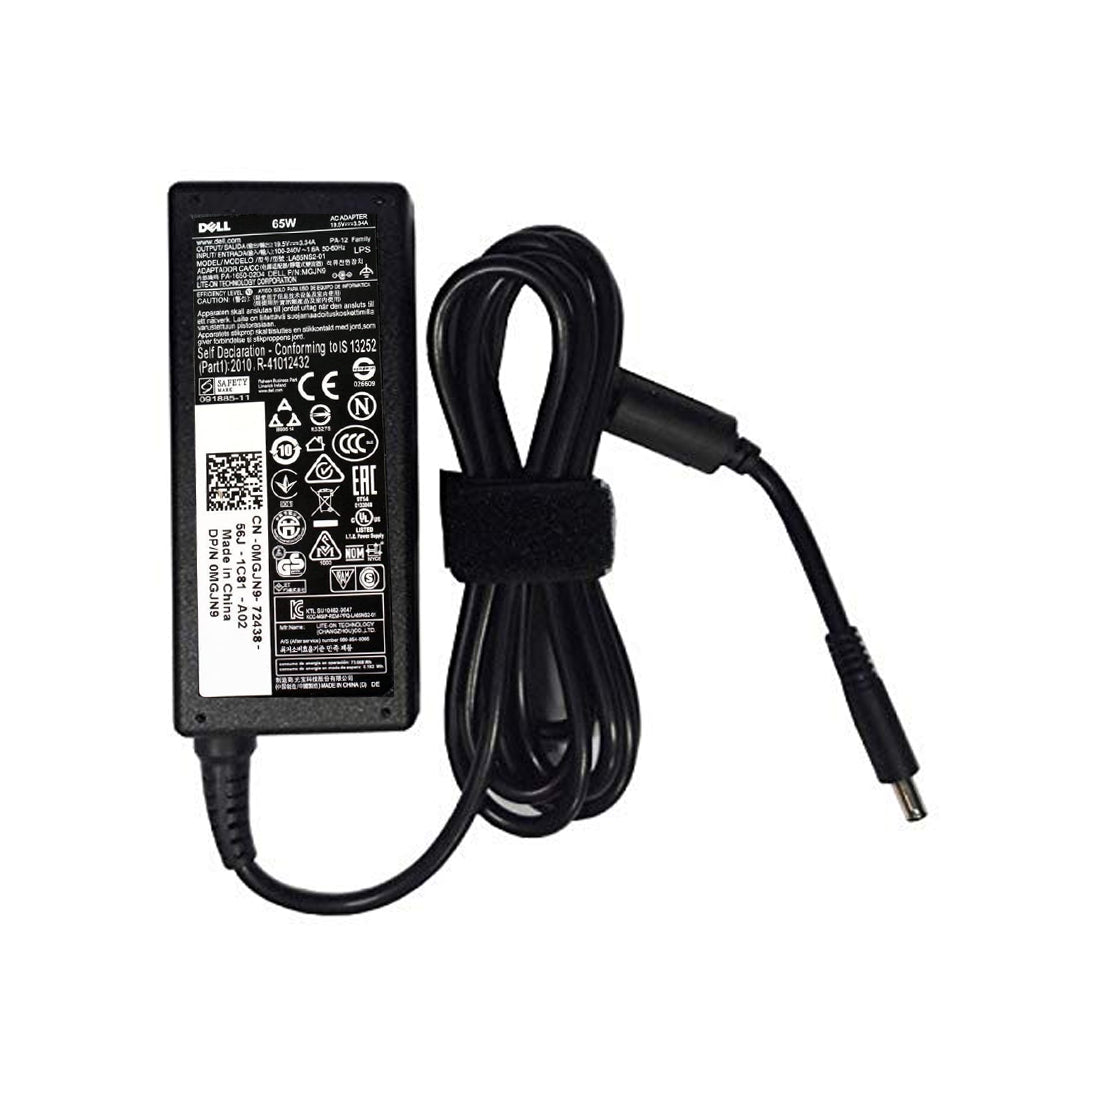 Dell Original 65W 19.5V 4.5mm Pin Laptop Charger Adapter for Inspiron 13 5370 With Power Cord